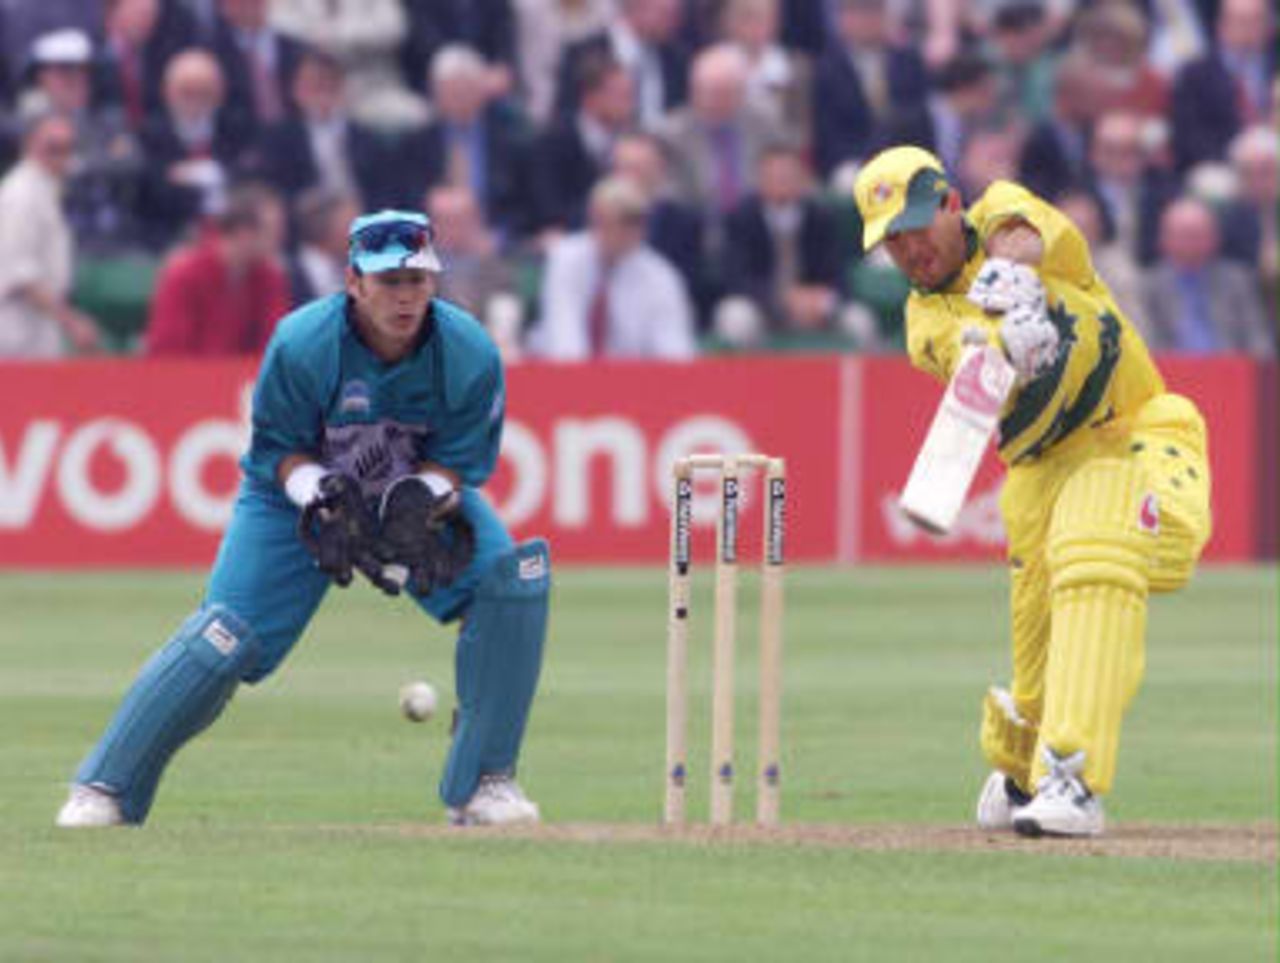 Australia's Ricky Ponting drives the bowling of New Zealand's Chris Harris 20 May 1999, with Adam Parore keeping wicket.